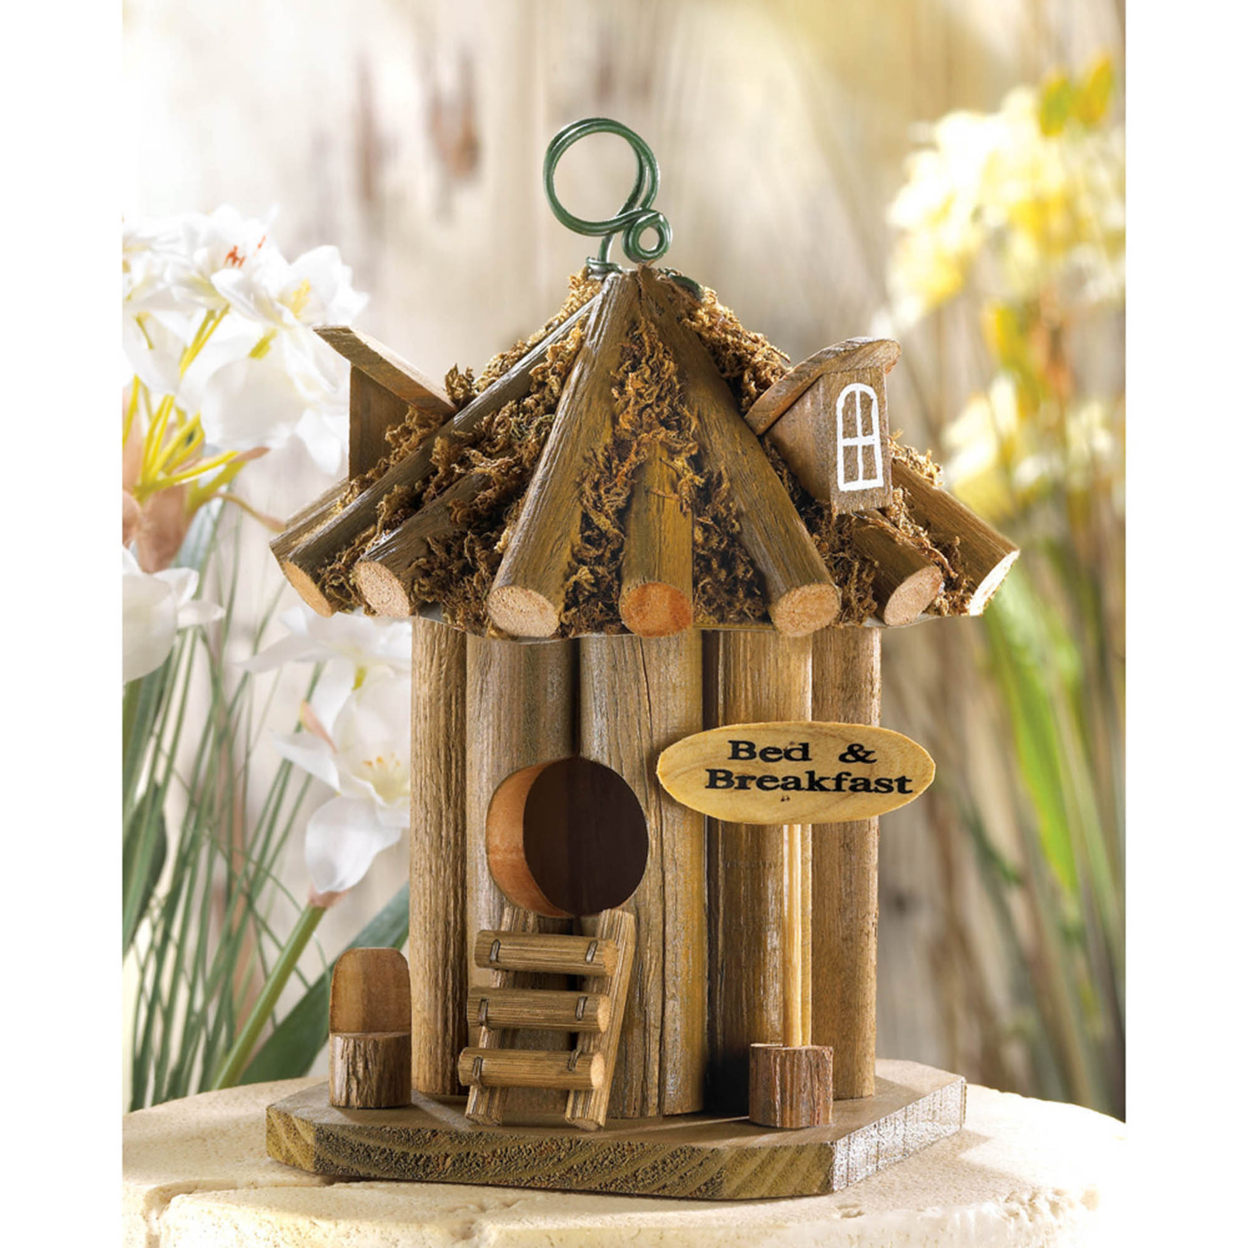 Home Decorative Bed And Breakfast Wood Birdhouse - Brown - image 4 of 5